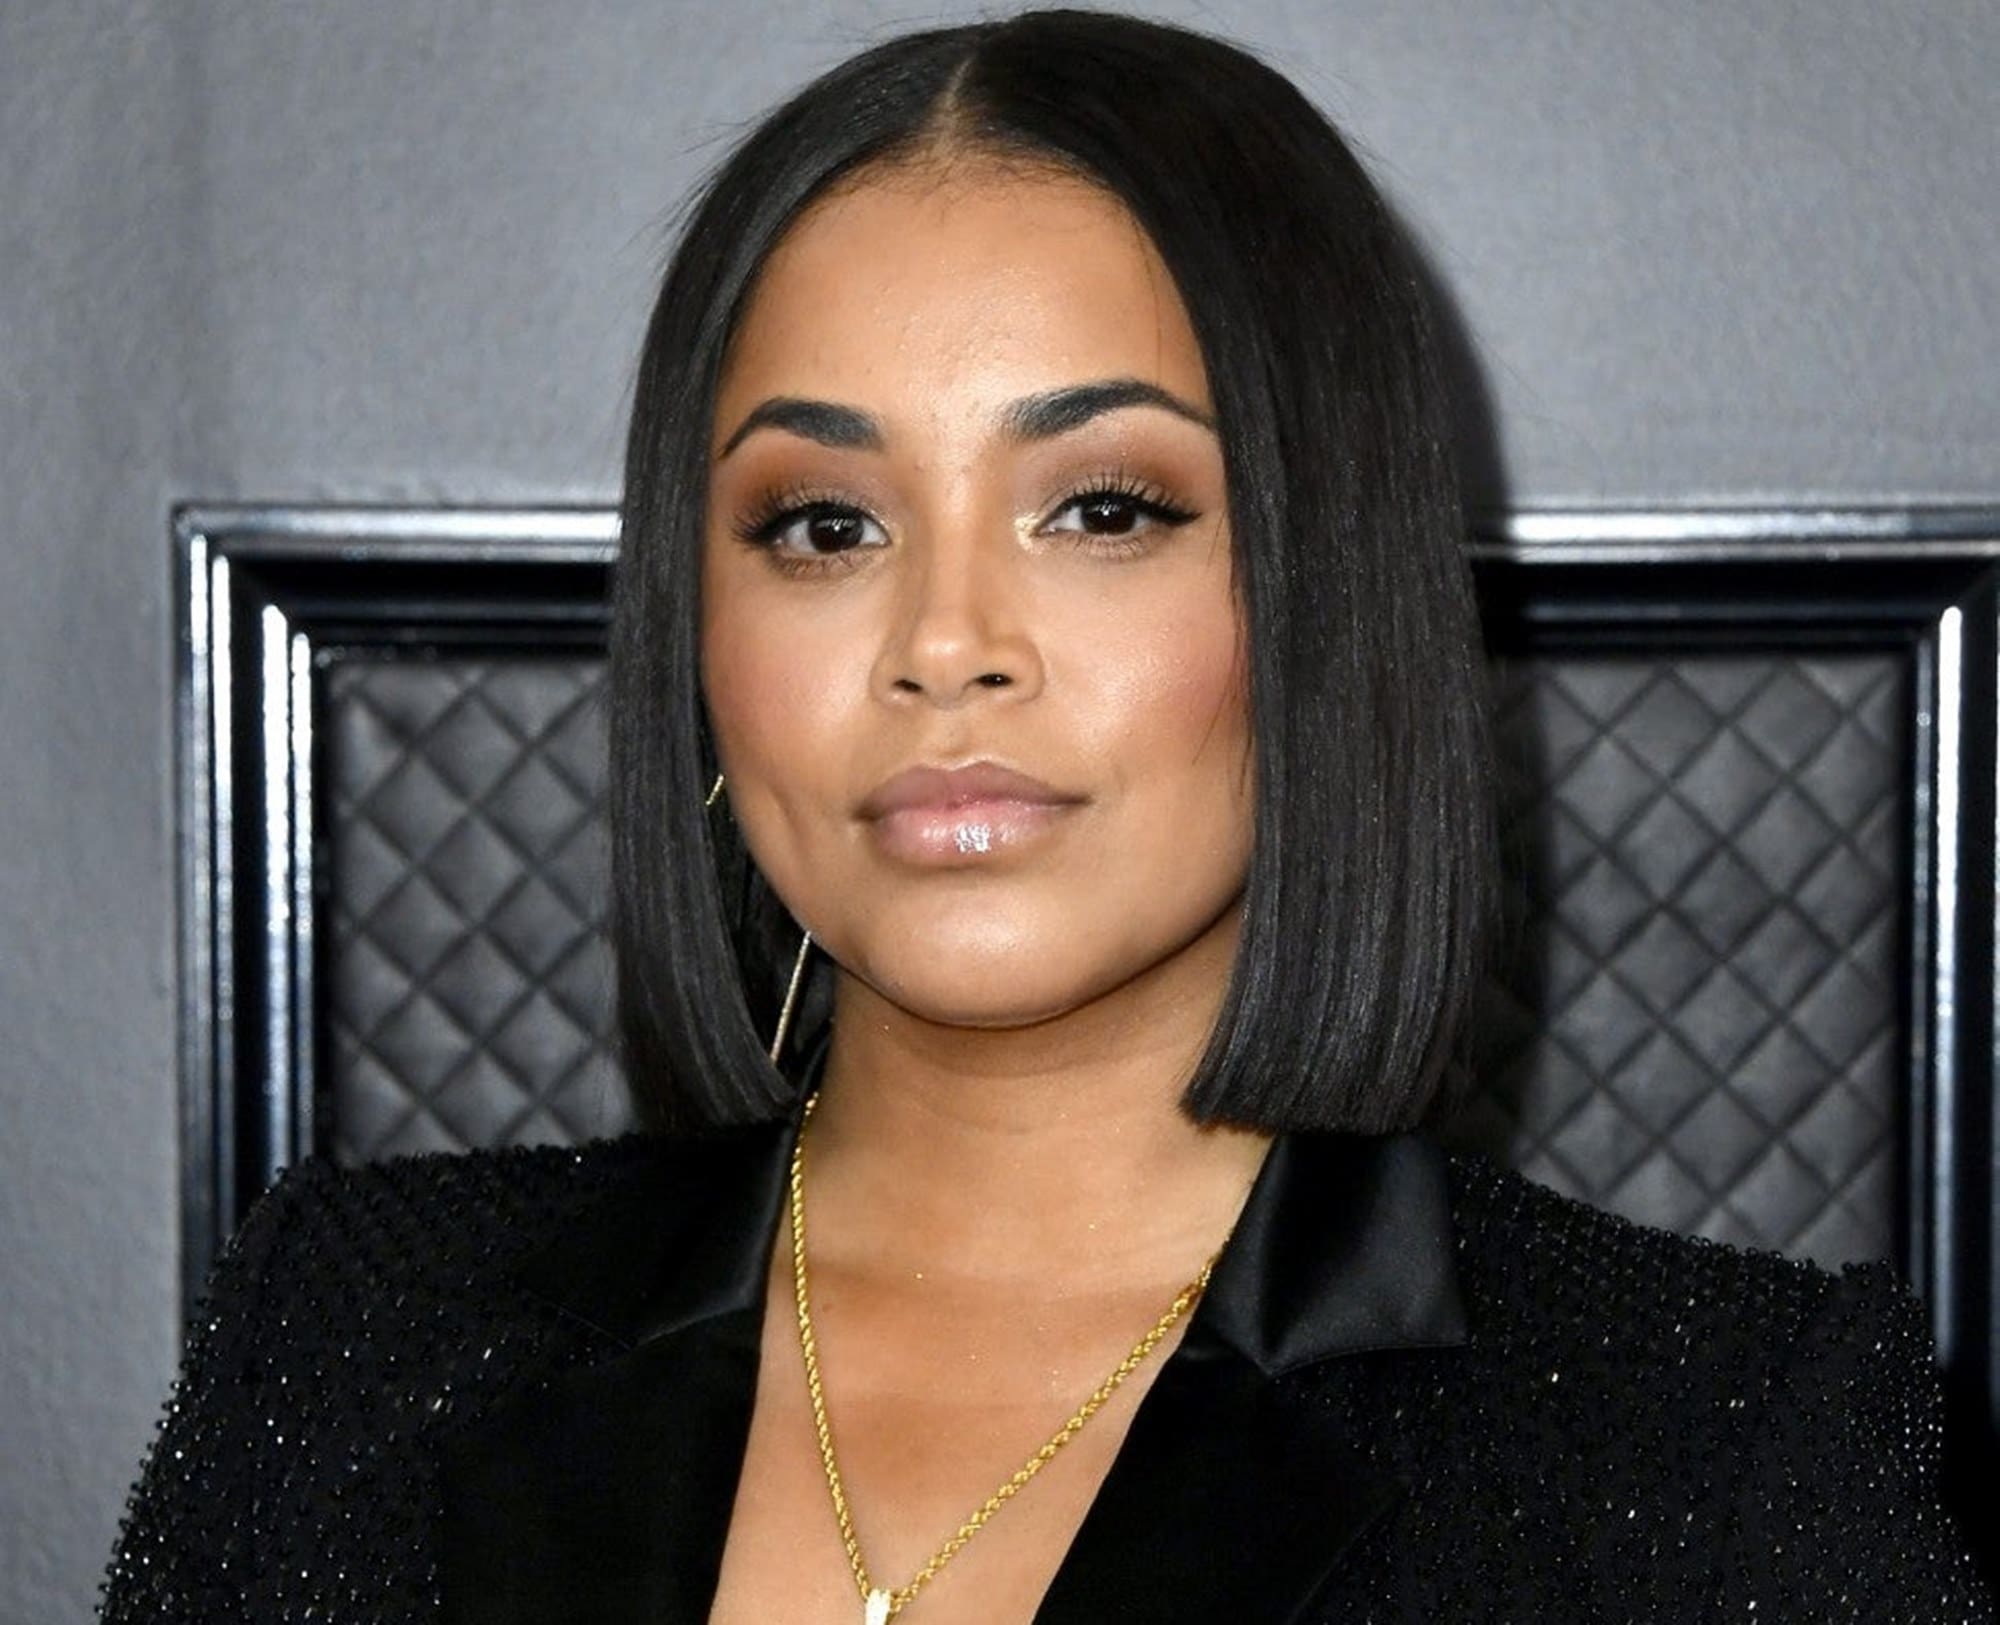 Both Samantha Smith and Lauren London have taken to social media to pay tribute to him. This week marked the first anniversary of the sad passing of the rapper and activist. In 2019, Nipsey Hussle was killed by crazed gunman Eric Holder as he was helping out a man in front of his store. Nipsey Hussle's sister Samantha shared a few never seen photos and this moving message: "What is a world without you in it An unnatural experience The physical absence is unbearable So I seek comfort in the omnipresence of your spirit Evolving beyond worldly standards You can not be enclosed in a singular dimension You run deep and wide and vast Expansive Extensive The love is endless There are No limits to your Timeless Existence God Has Risen Ermias 🙏🏽" https://www.instagram.com/p/B-bd2HxpwJy/ Lauren did the same with this emotional message: "Time is deceptive It’s been a year since you transitioned The pain is as heavy today as it was a year ago God knows I would give anything to see you again I didn’t think I was going to survive a second of any of this Prayers have kept me together The kids keep me going and Gods Grace and Mercy have carried me this far As today makes a year I stand strong because of you Because I know you wouldn’t have it any other way Because I recall every late night conversation we had about resilience and fear Because you were my greatest teacher and because you are still with us, in spirit." https://www.instagram.com/p/B6vyQ_-JT1u/ The model and actress added: "With every breath I take I honor you I carry this pain with purpose I promise I will make you proud I promise to apply everything you taught me In life and in death Ermias Asghedom There will never be another Until we are together again... I love you beyond human understanding ( but you know that already)🏁" https://www.instagram.com/p/B-bd2HxpwJy/ One fan had this reaction: "She was a wife in every way that matters❤️ 🙏🏽 prayers up for her and the children🕊🏁💙" Another person explained: "That's the most beautiful thing about love 😍 it sometimes beyond anything or anyone understanding ♥️♥️" This social media user stated: "Still so sad for her. I can’t believe a year has come and gone so quickly. I can’t imagine the pain his loved ones have had to endure. My heart truly breaks for Lauren London. I truly pray her strength #Blessings."